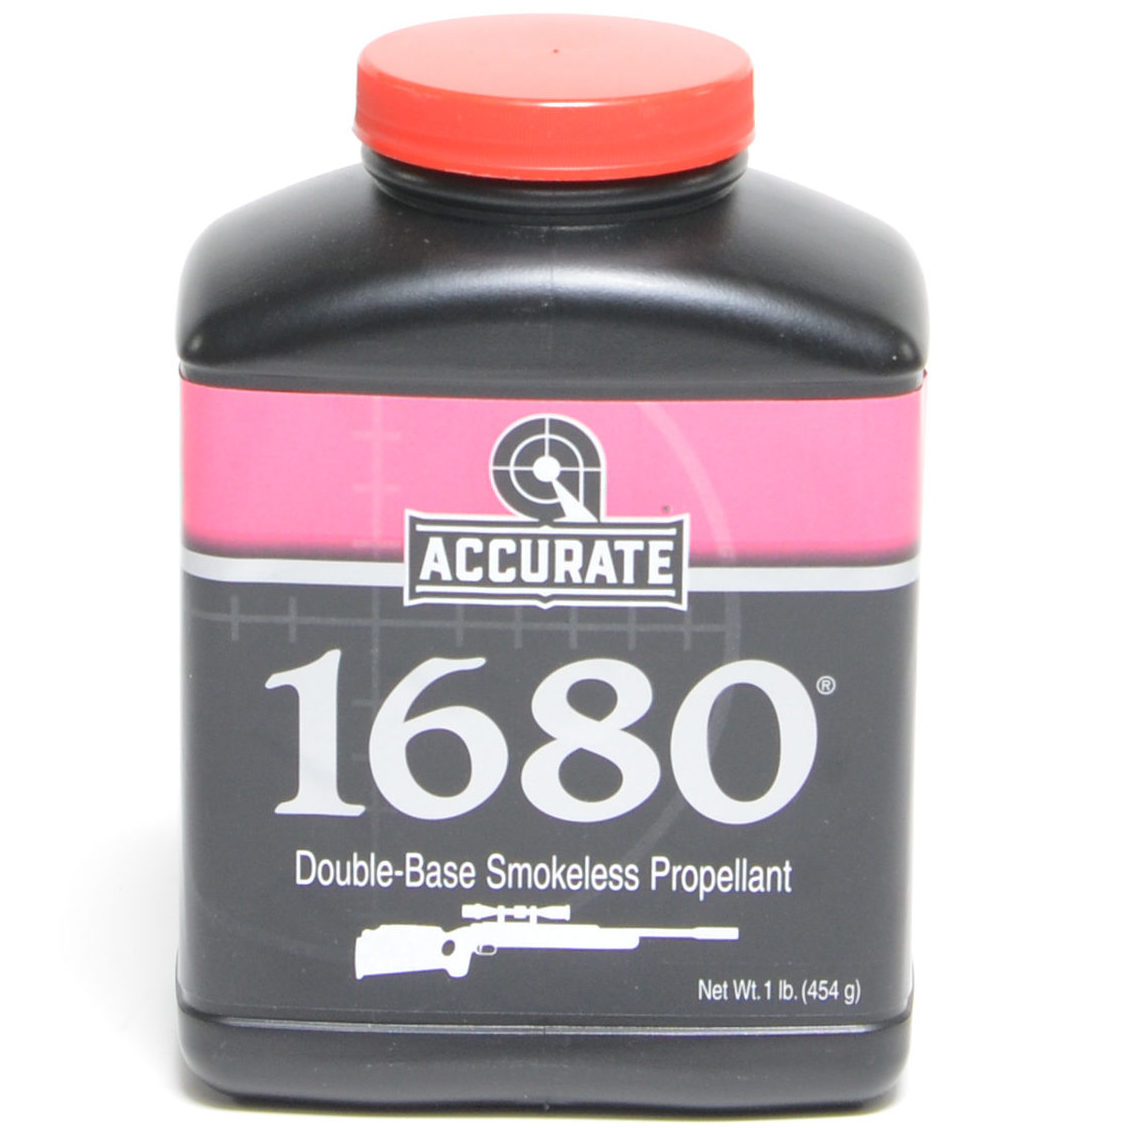  Accurate1680 Powder in stock now for sale 